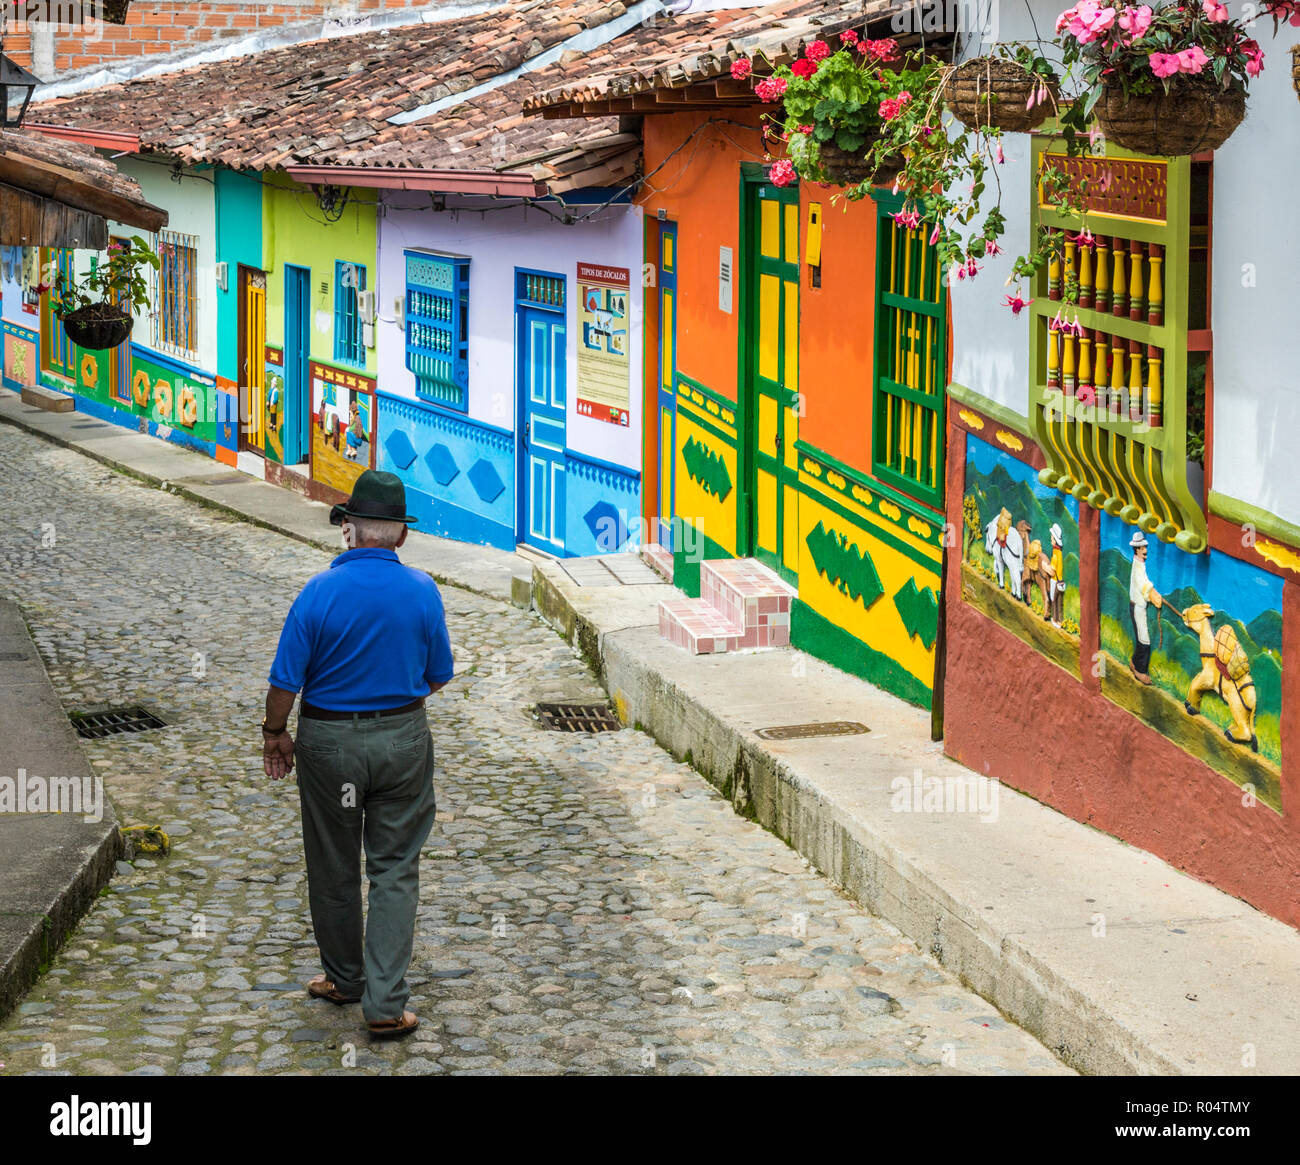 A typically colourful street with buildings covered in traditional local tiles in the picturesque town of Guatape, Colombia, South America Stock Photo